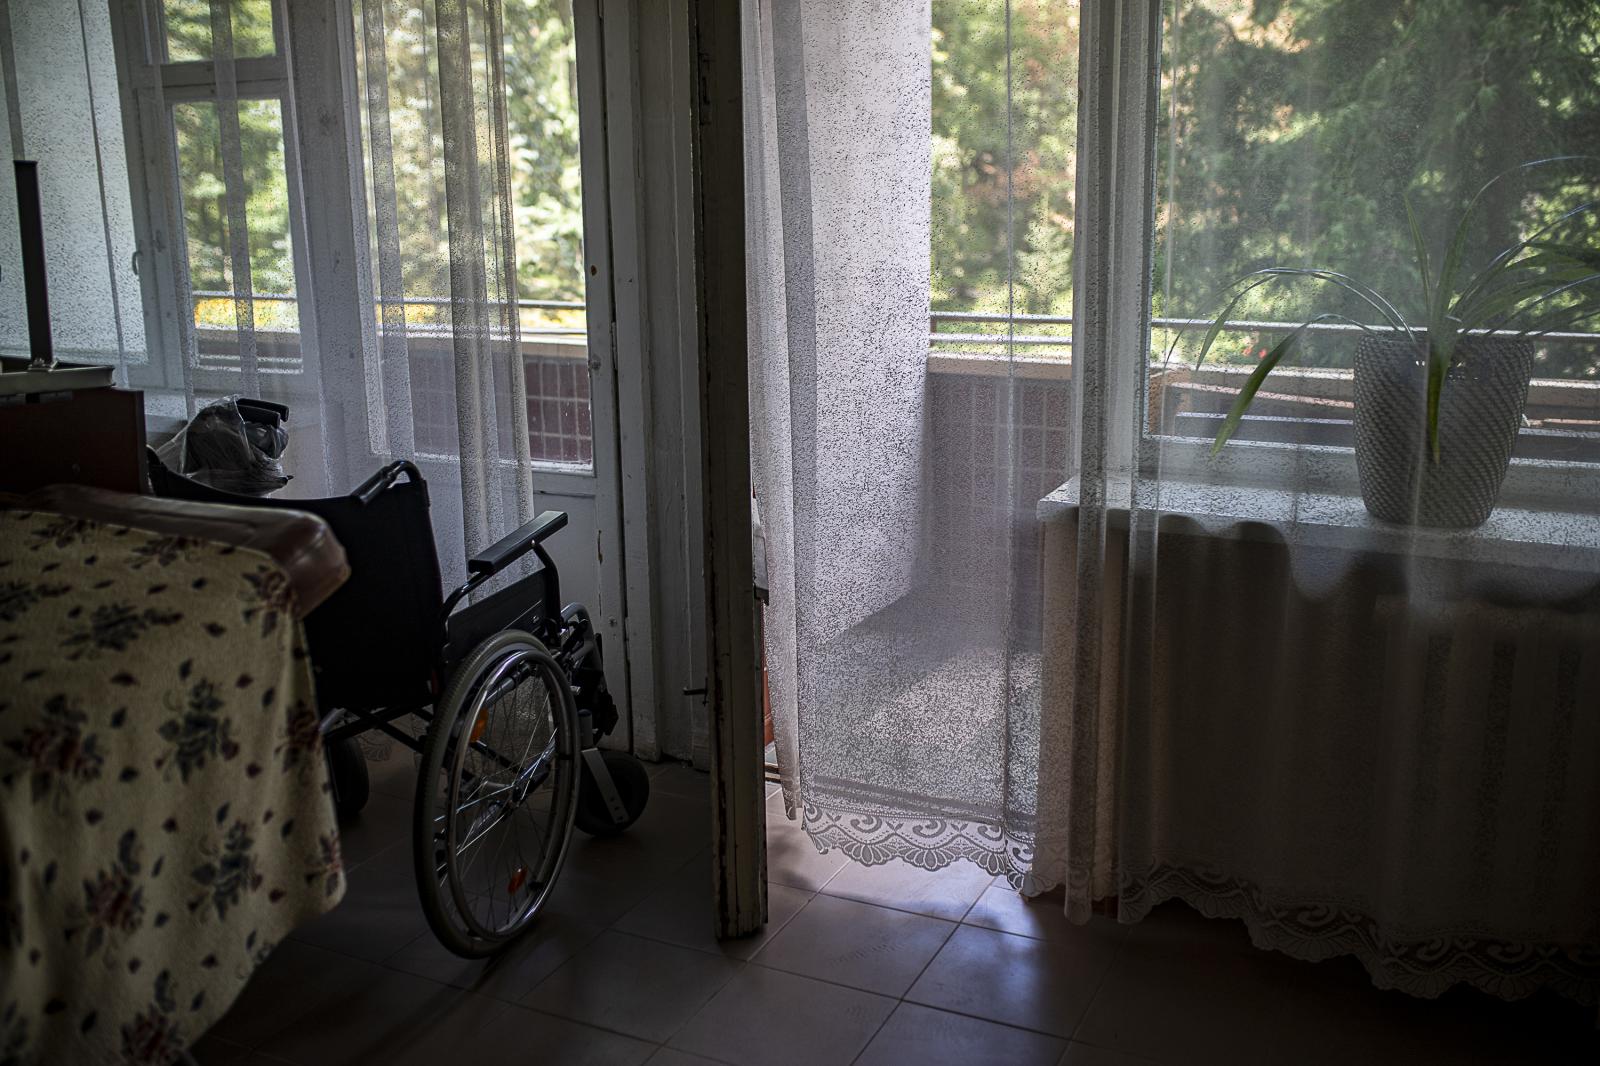 Walking wounded: a journey of recovery and hope - KYIV OBLAST, UKRAINE - JULY 21: A wheelchair sits in...